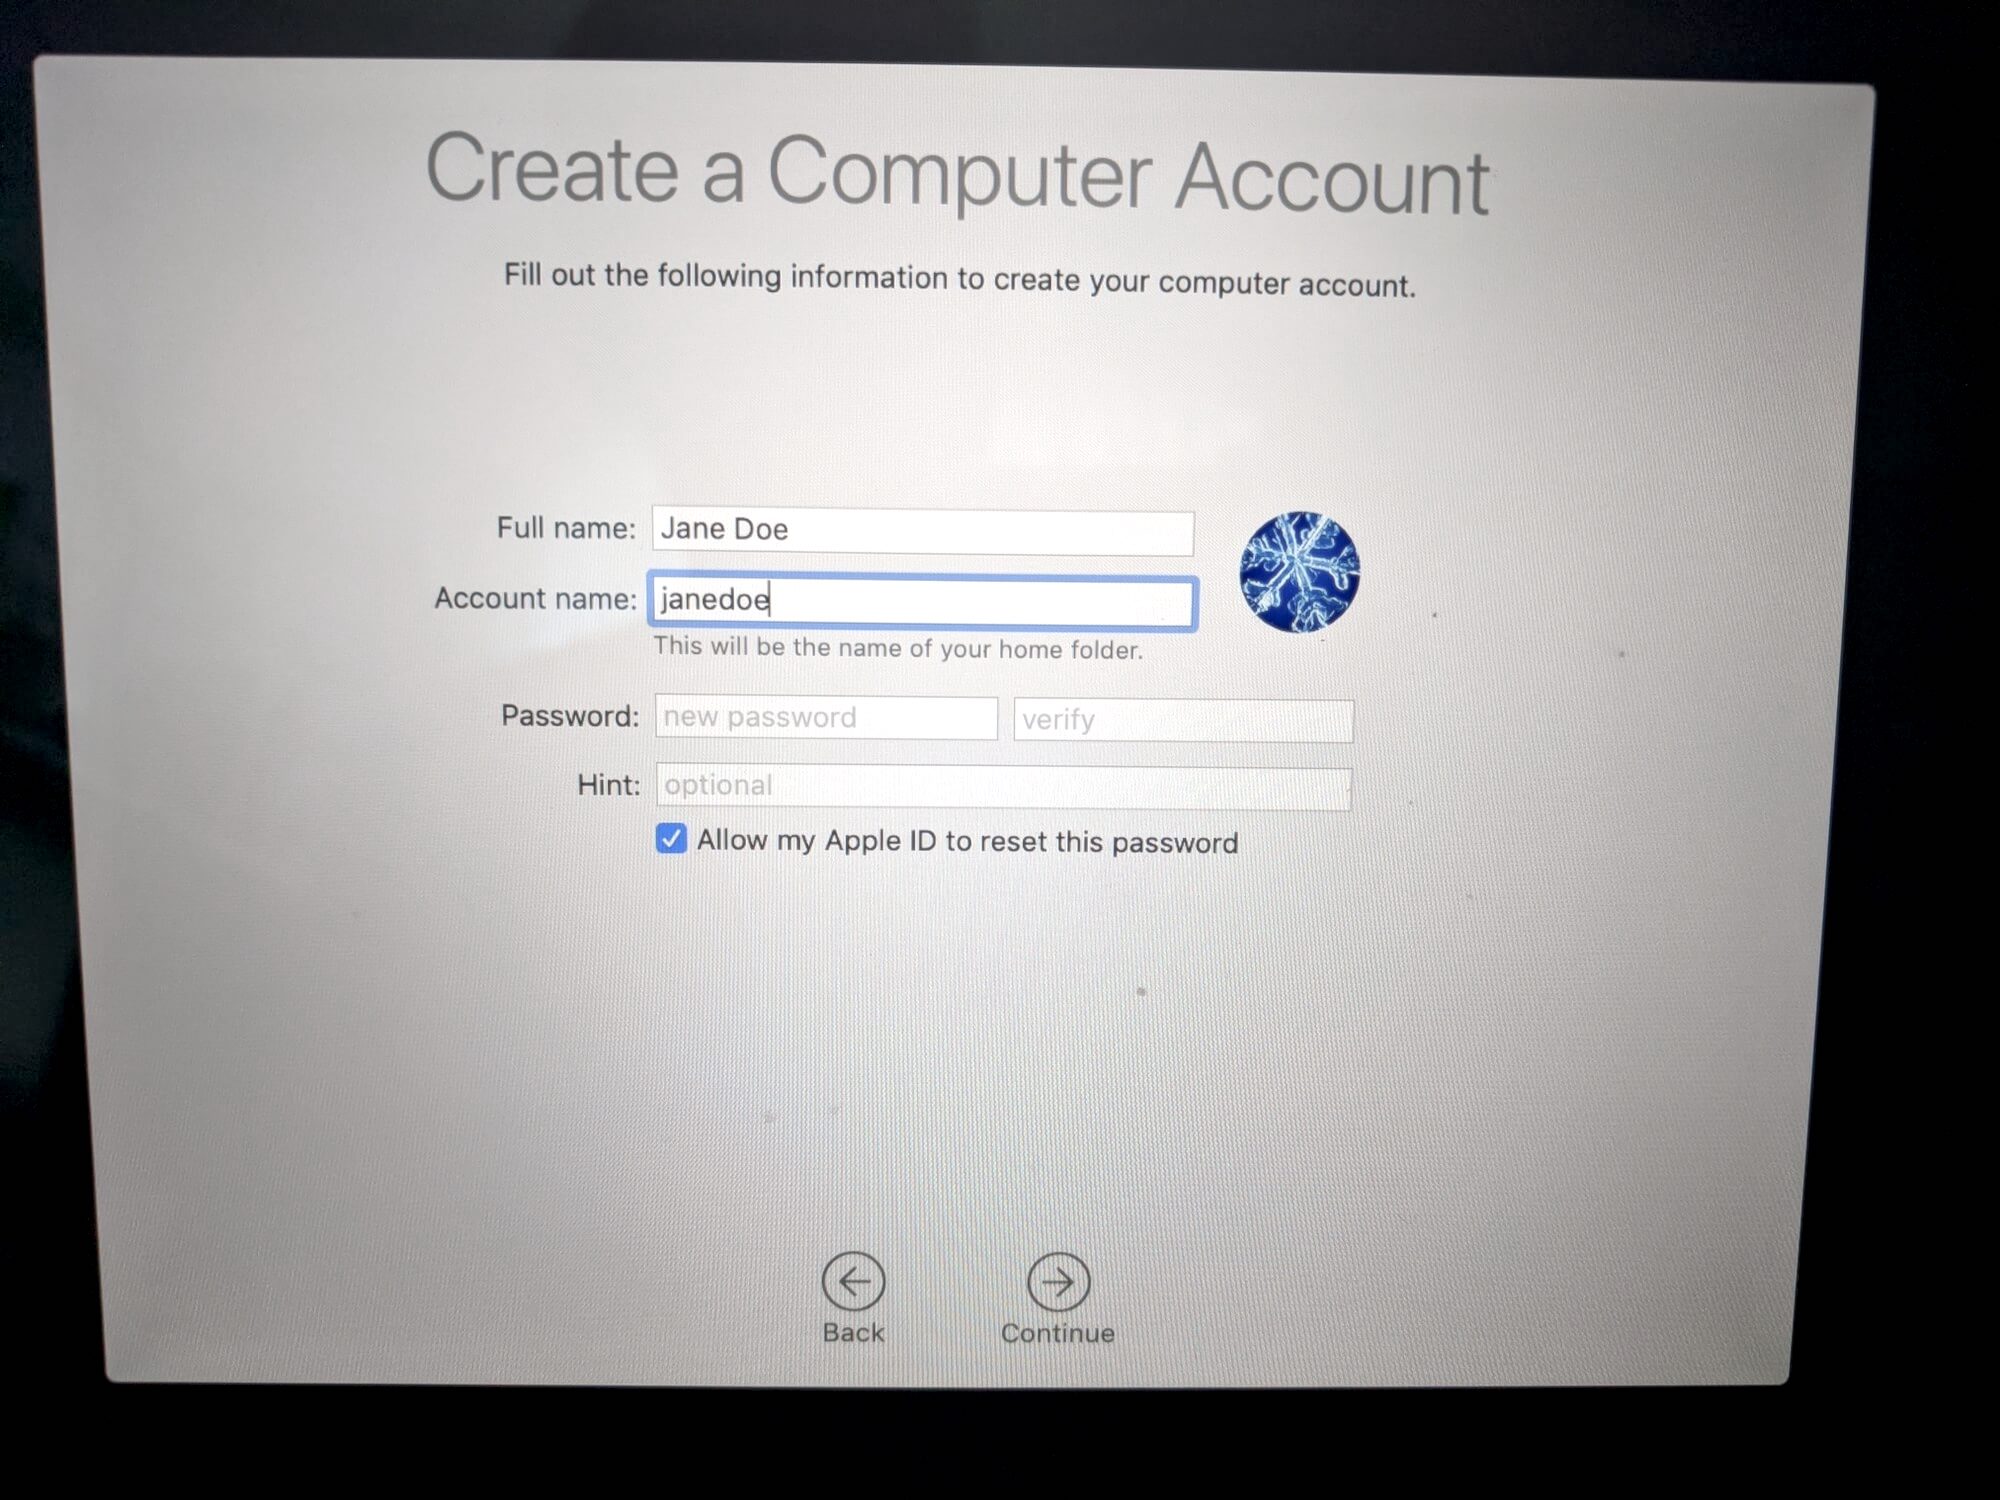 Decide what your computer account name will be